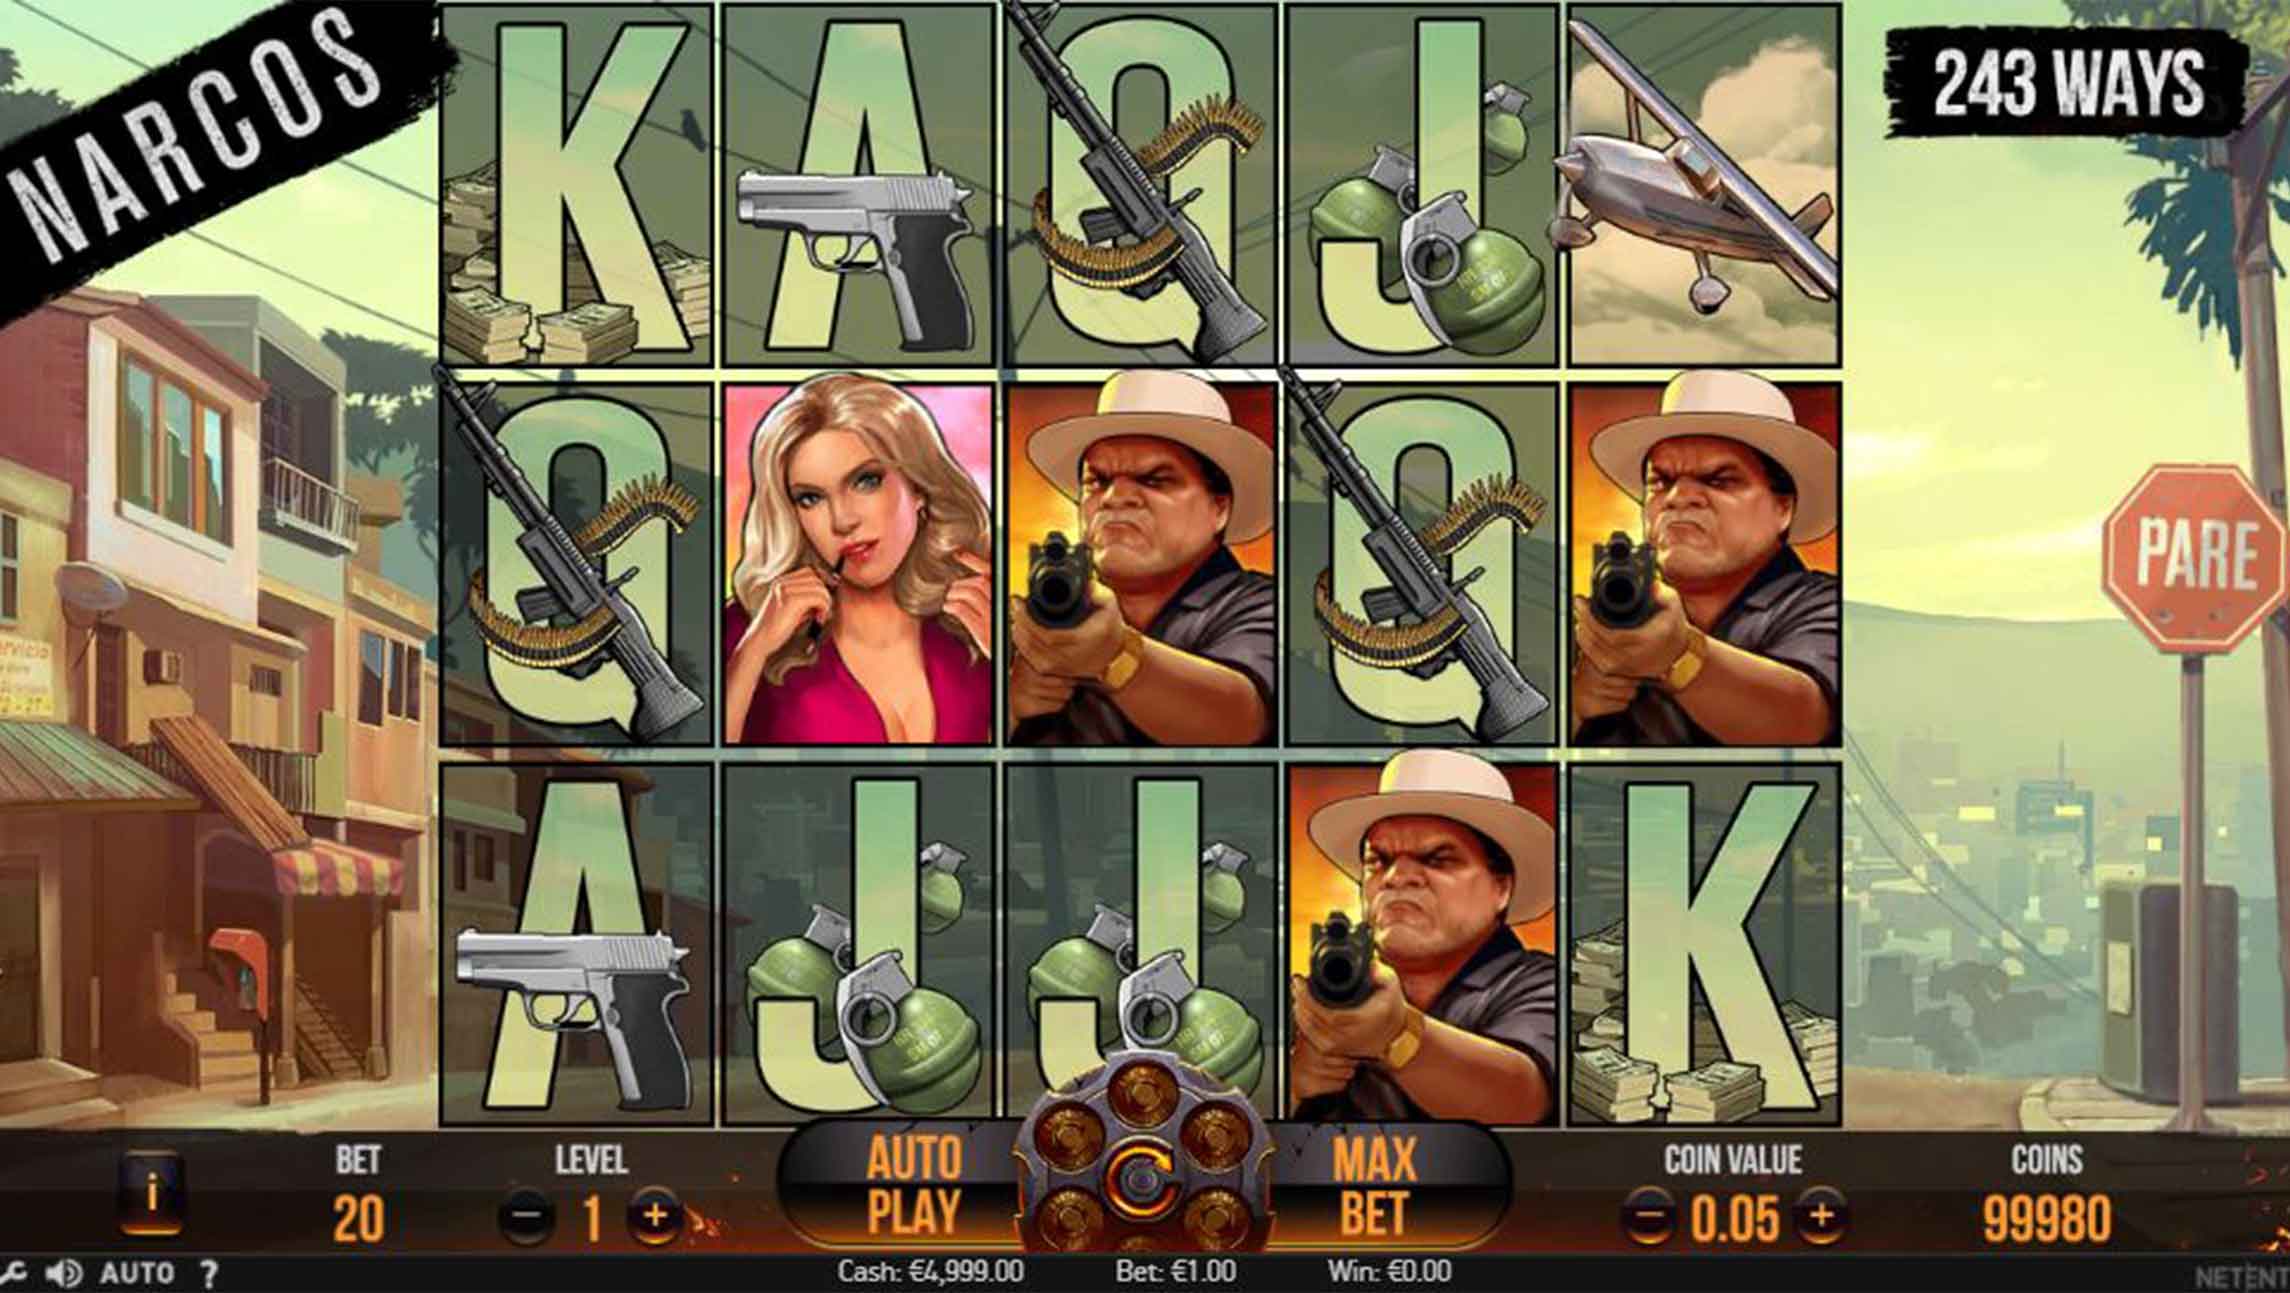 Narcos - Online slot by NetEnt